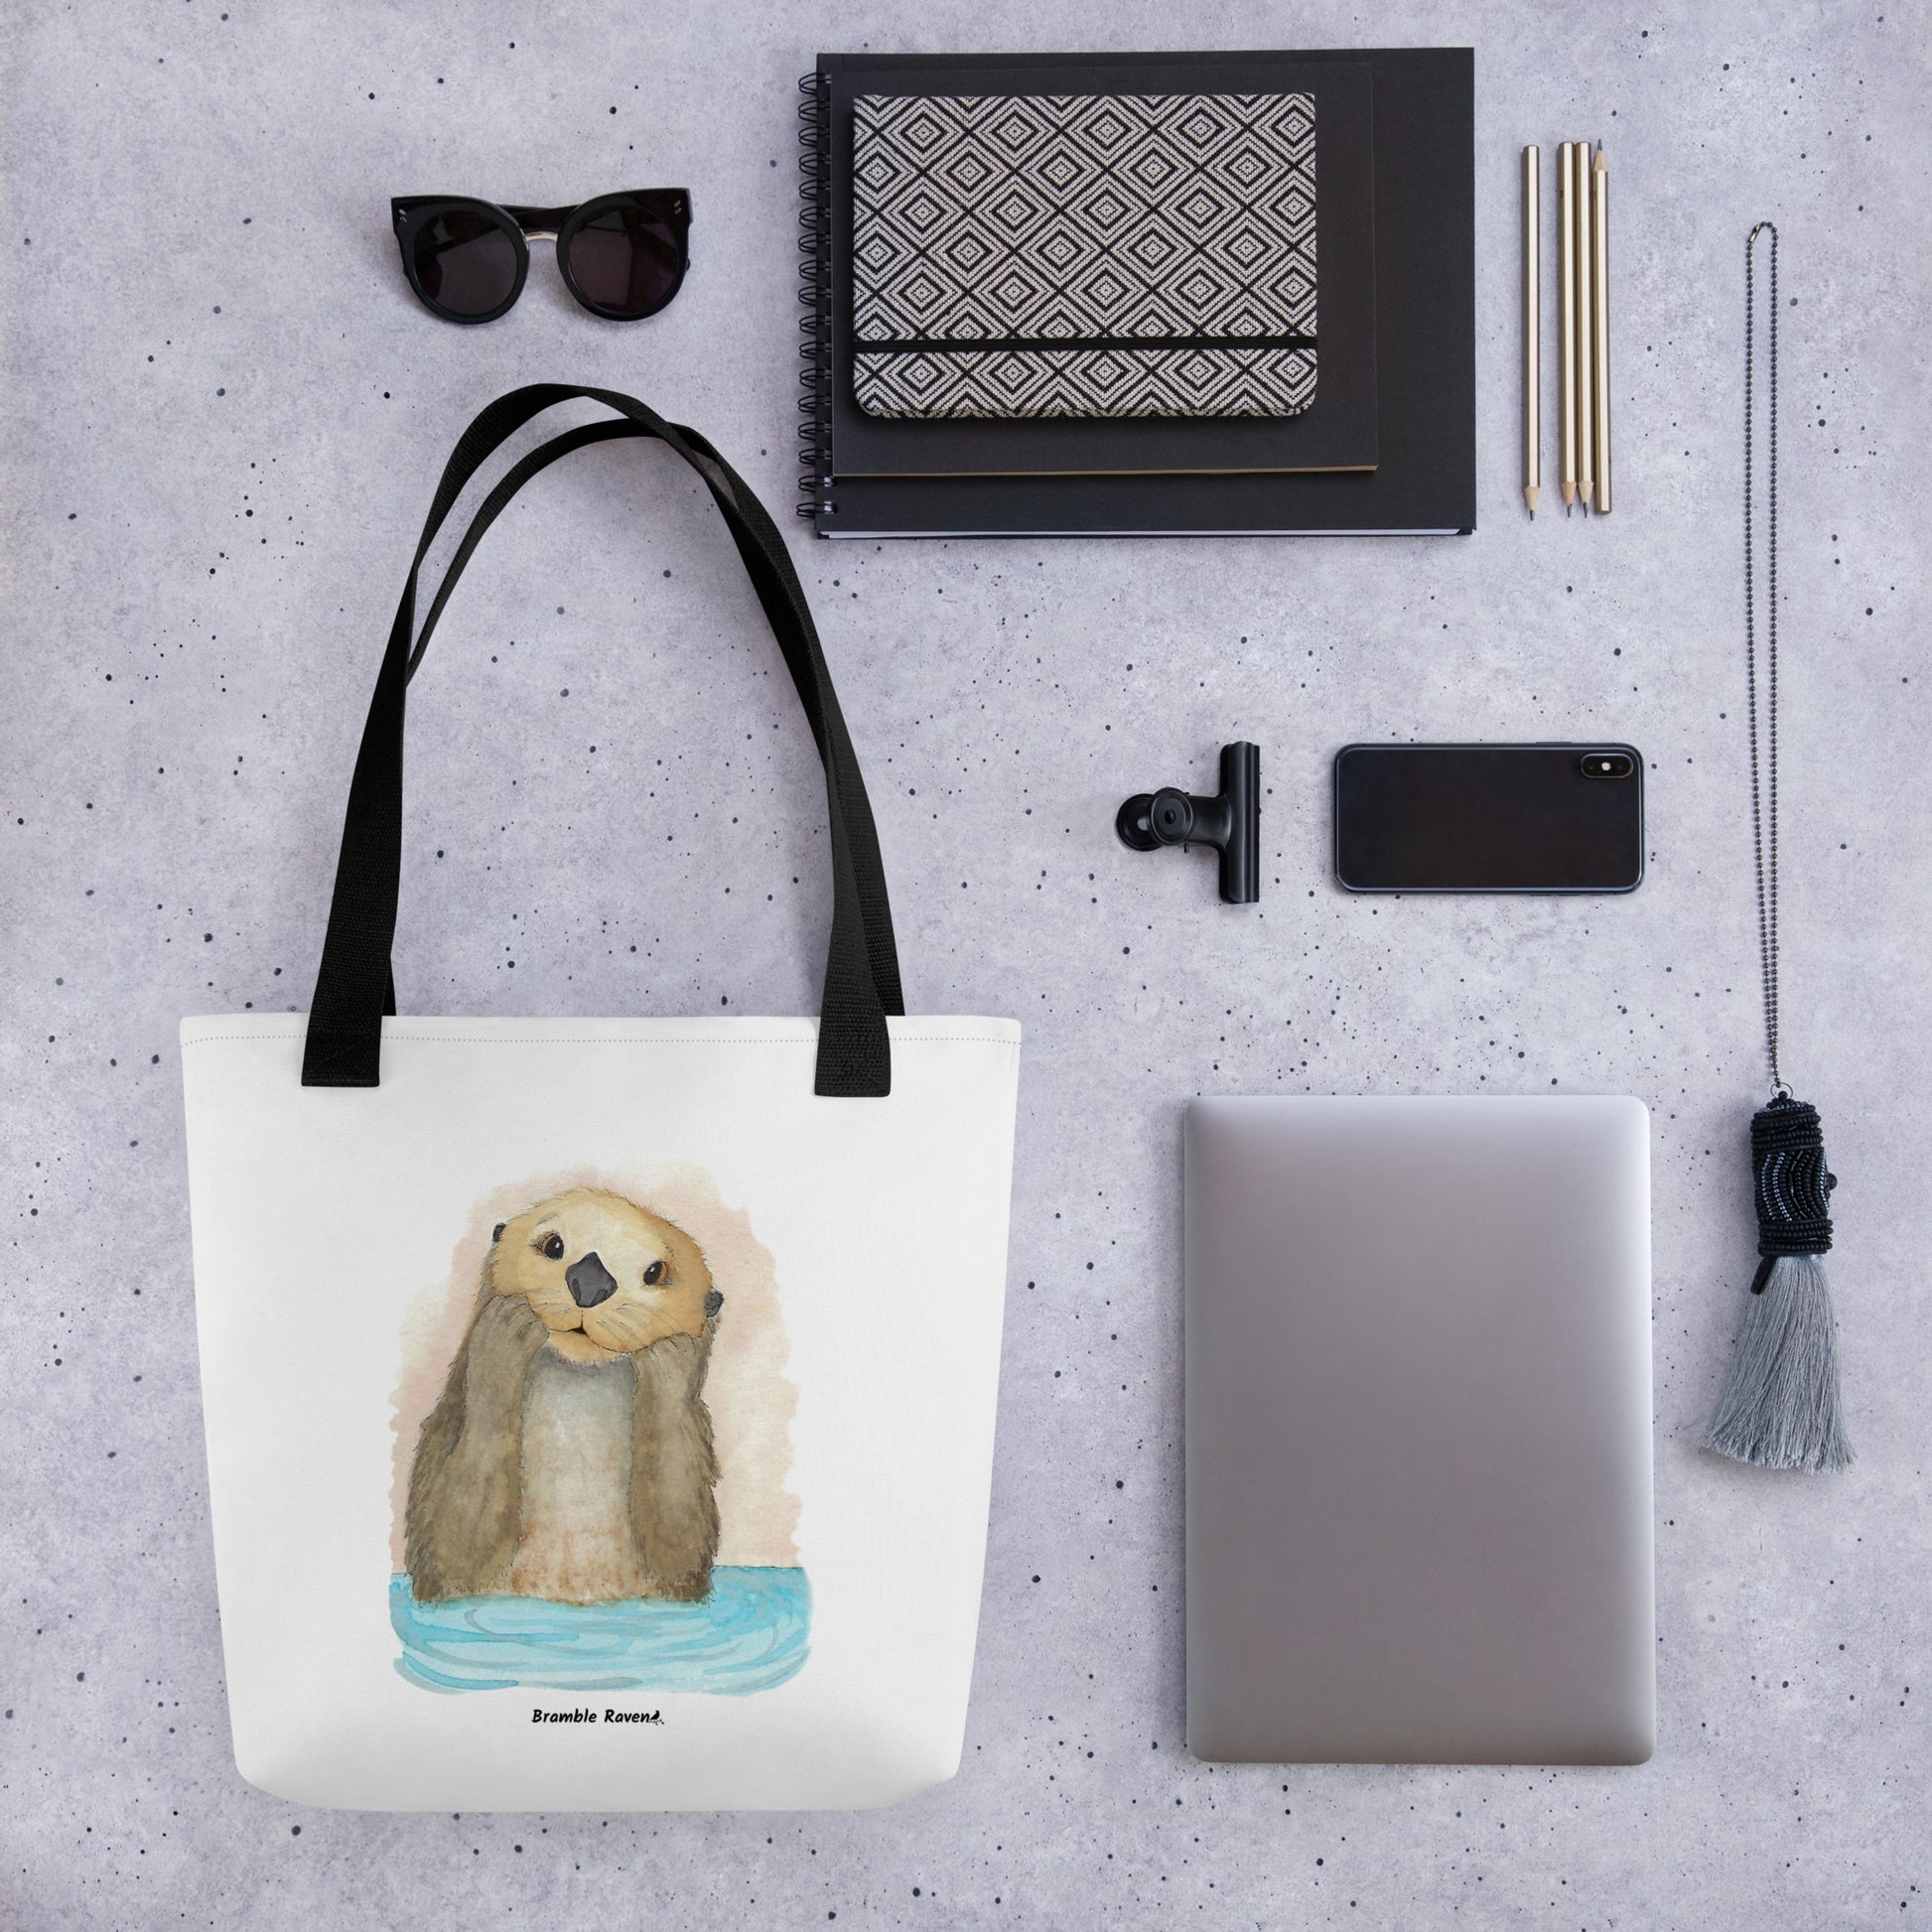 Otter Amazement sturdy tote bag. Measures 15" by 15" and can hold up to 44 lbs. Features watercolor sea otter painting printed on front and back. Has black handles. Shown by a notebook, sunglasses, phone, tablet, and keychain.